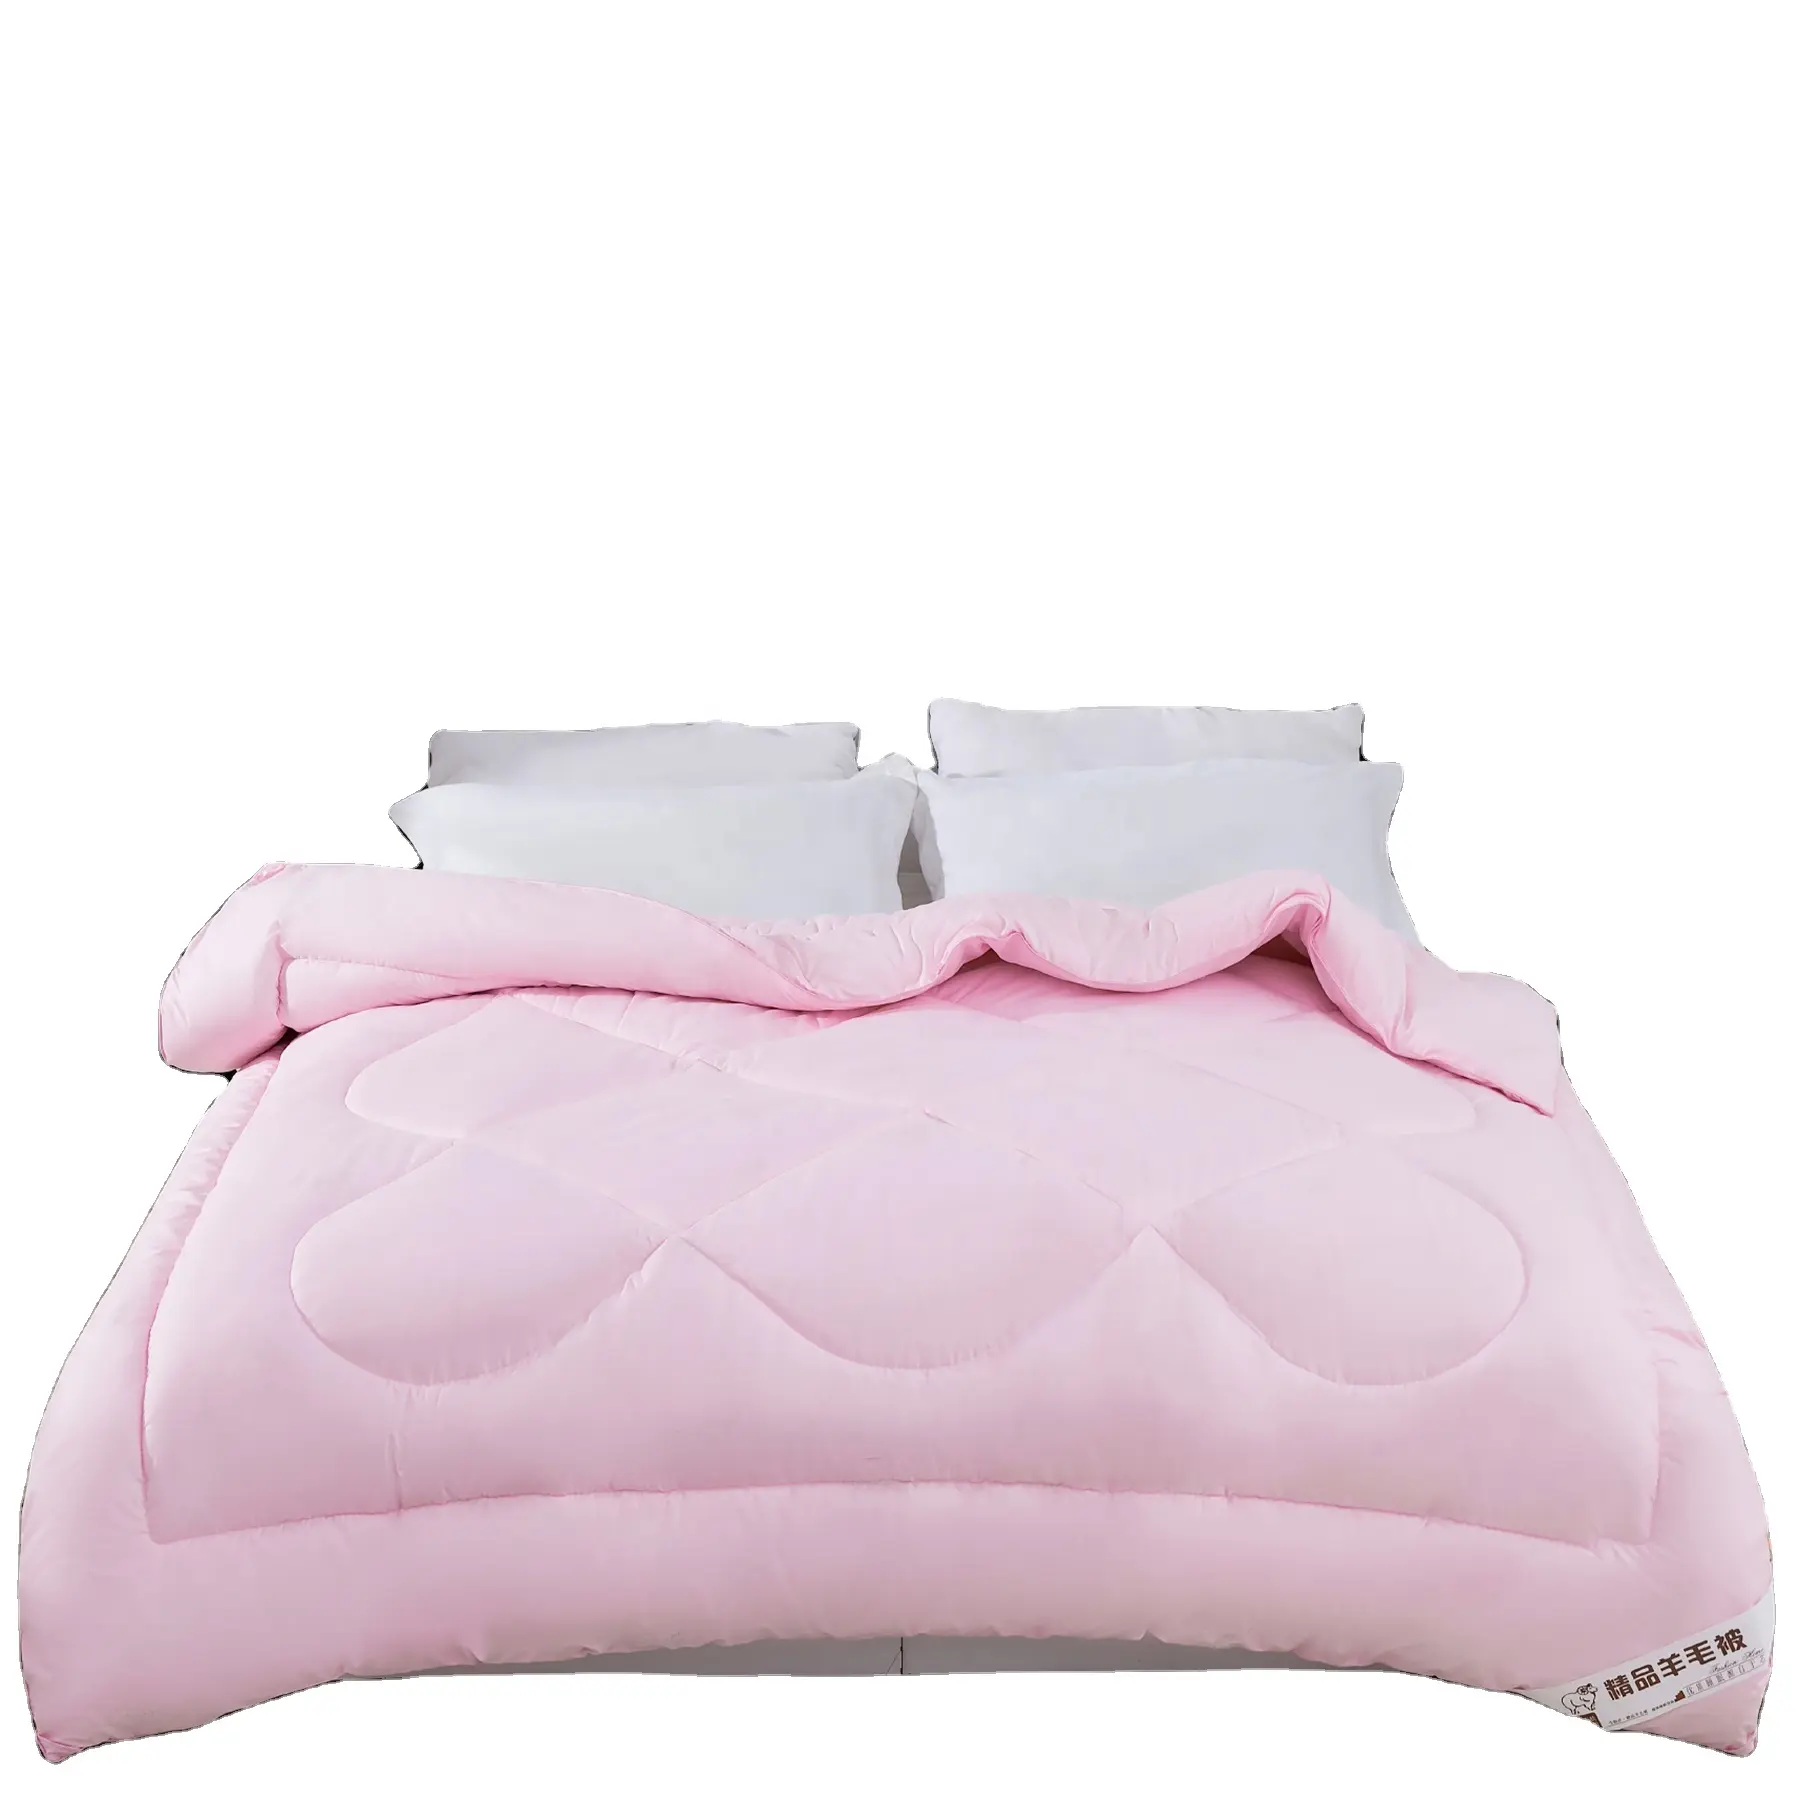 Premium Quality Cashmere Filling Quilt Exquisite Collection of Quilted Bedding Set- Featuring Luxurious Pure Wool Filling Quilt